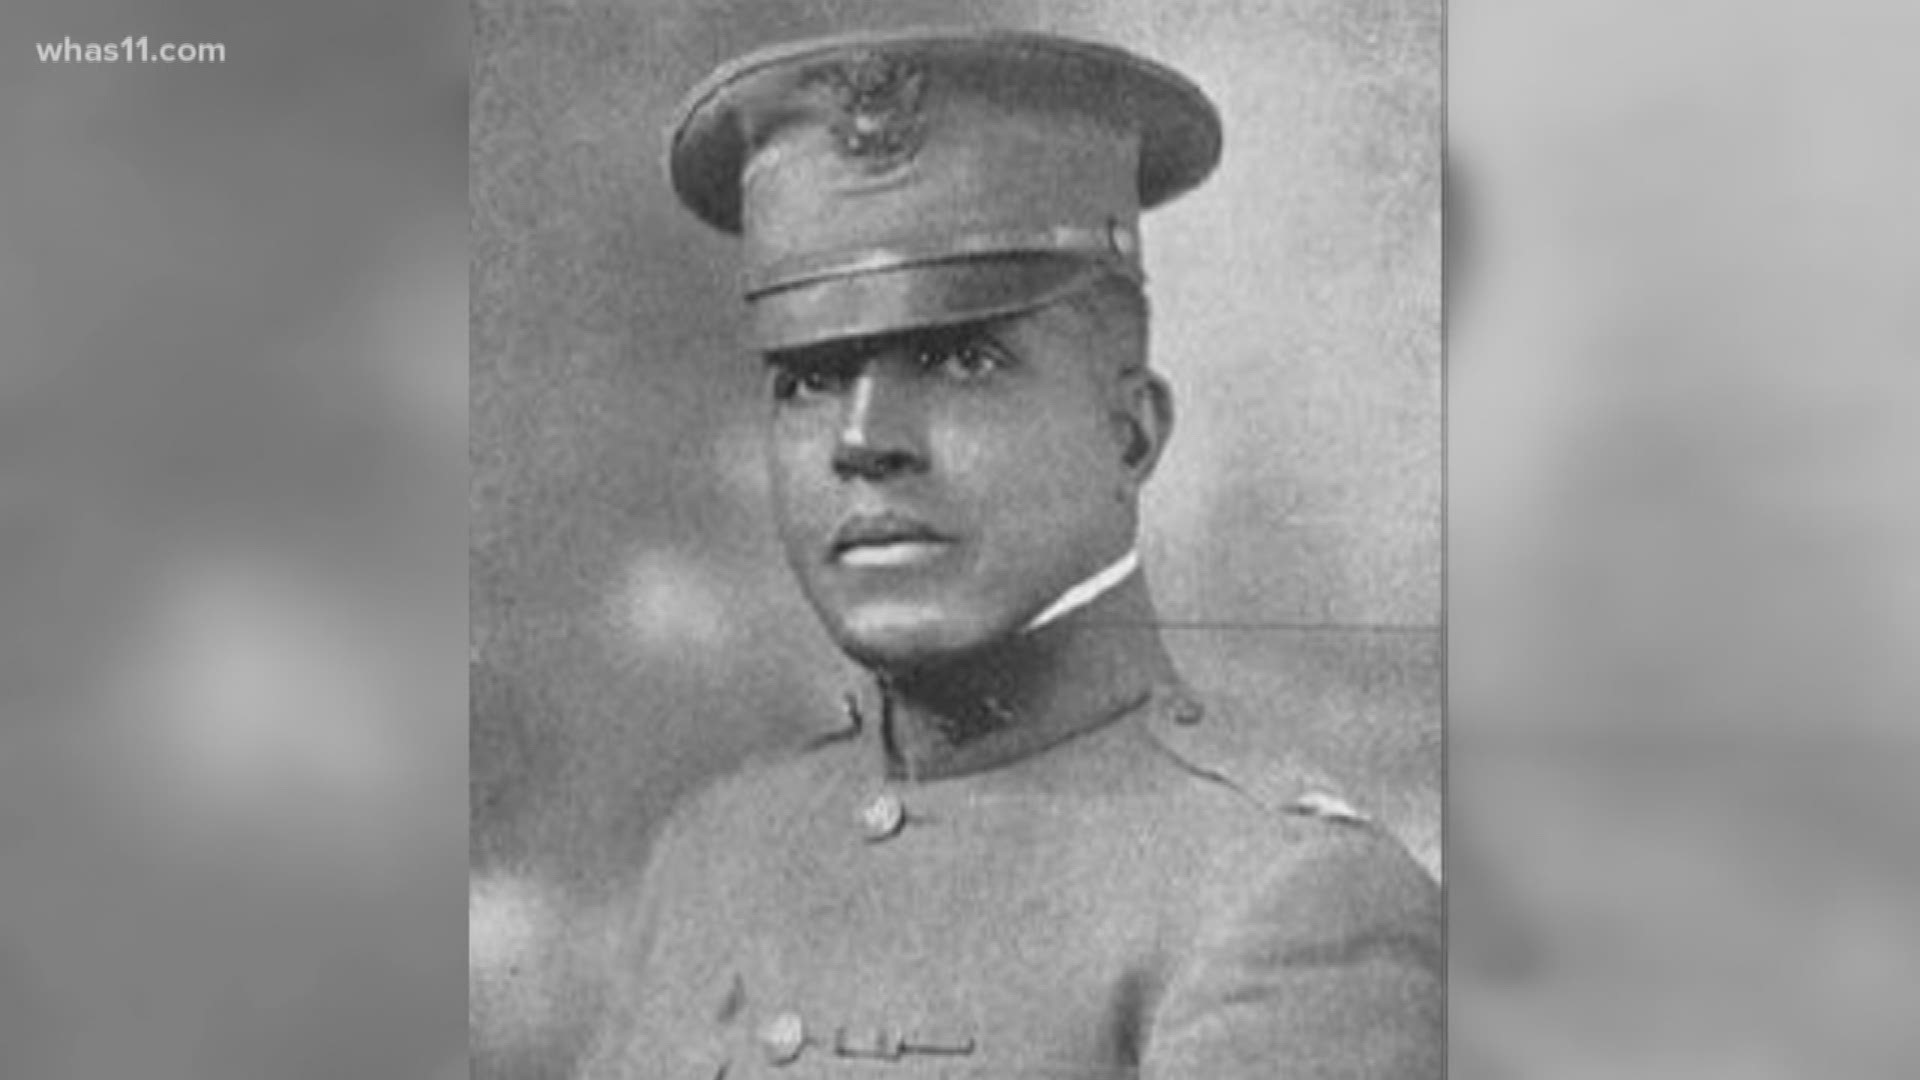 Almost a century after his death, Colonel Charles Young, the first black American to rise to the rank of colonel in the U.S. Army, is receiving another honor.